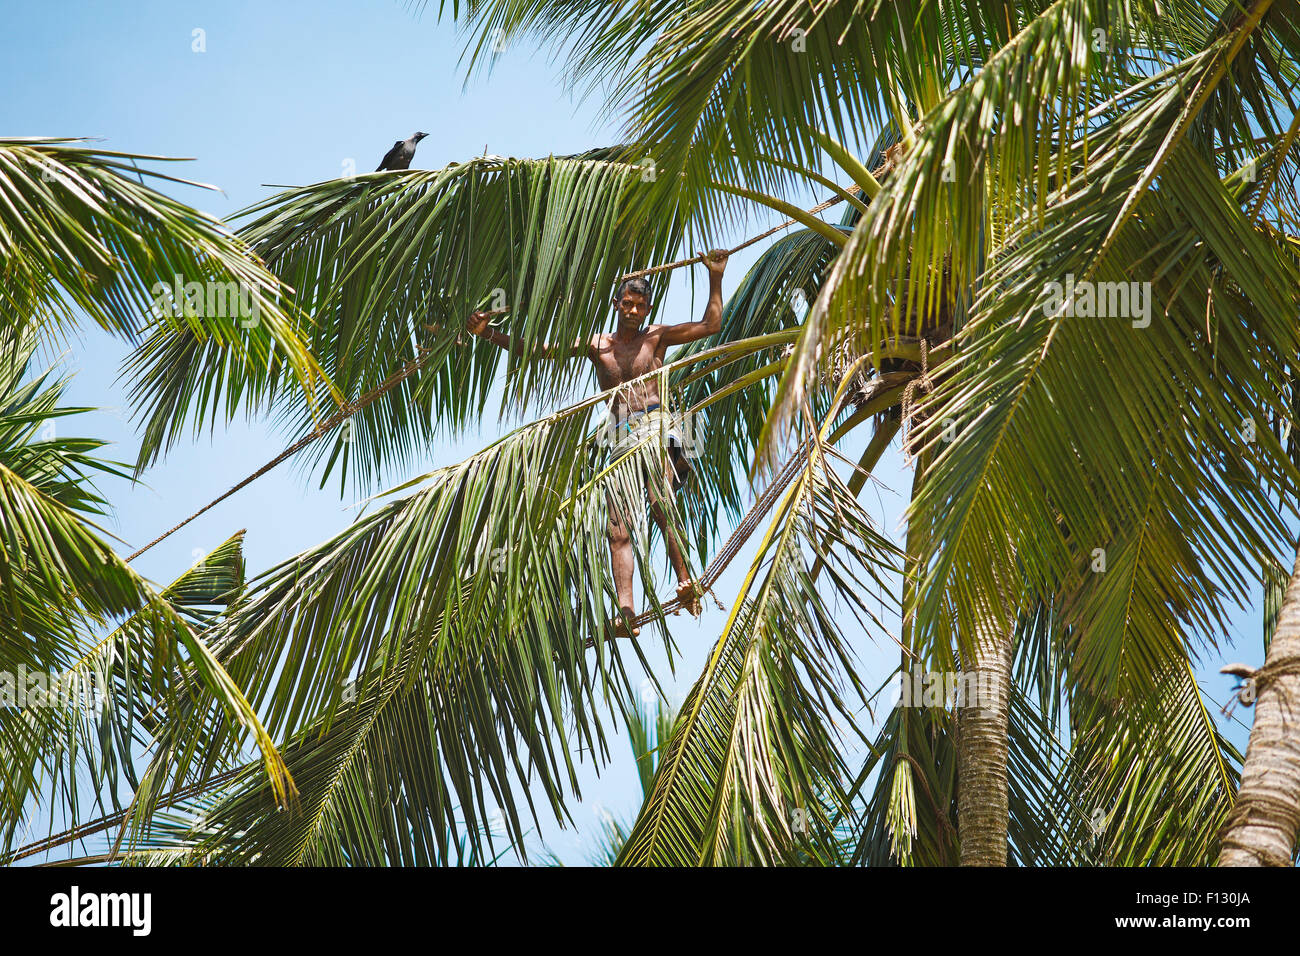 Toddy Tapper balancing on rope between coconut trees and collecting palm juice, Wadduwa, Western Province, Ceylon, Sri Lanka Stock Photo